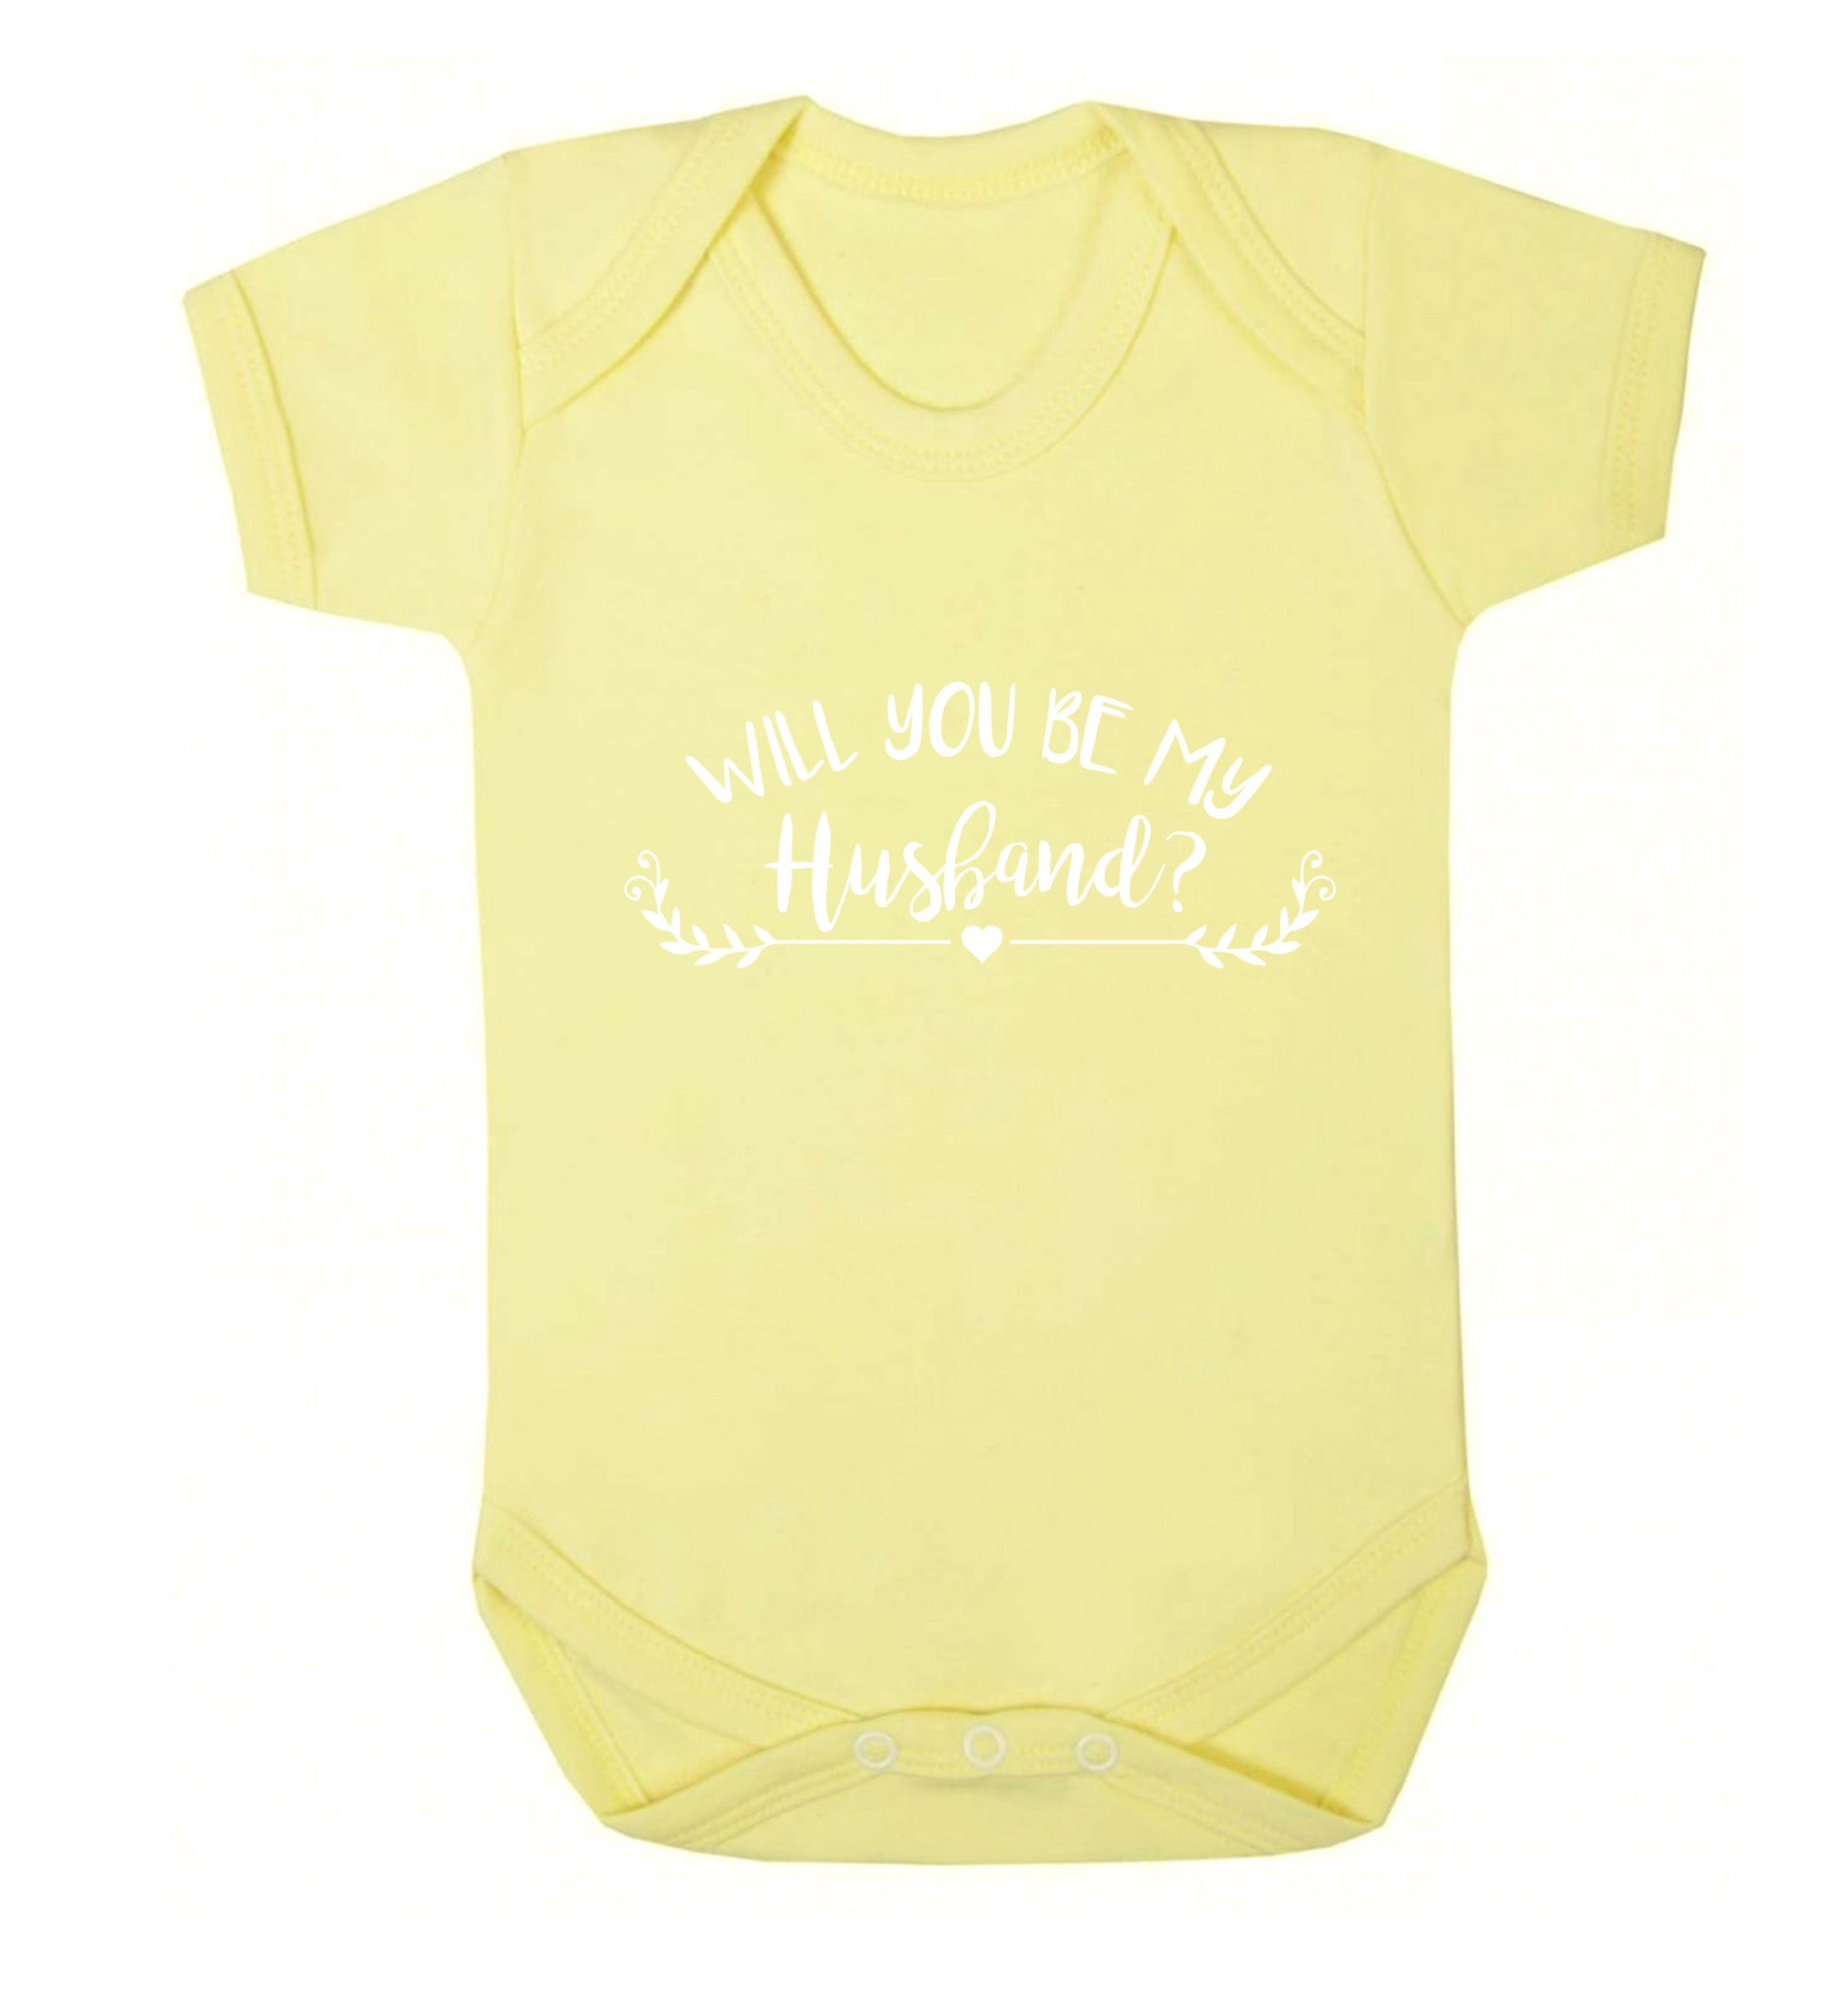 Will you be my husband? Baby Vest pale yellow 18-24 months